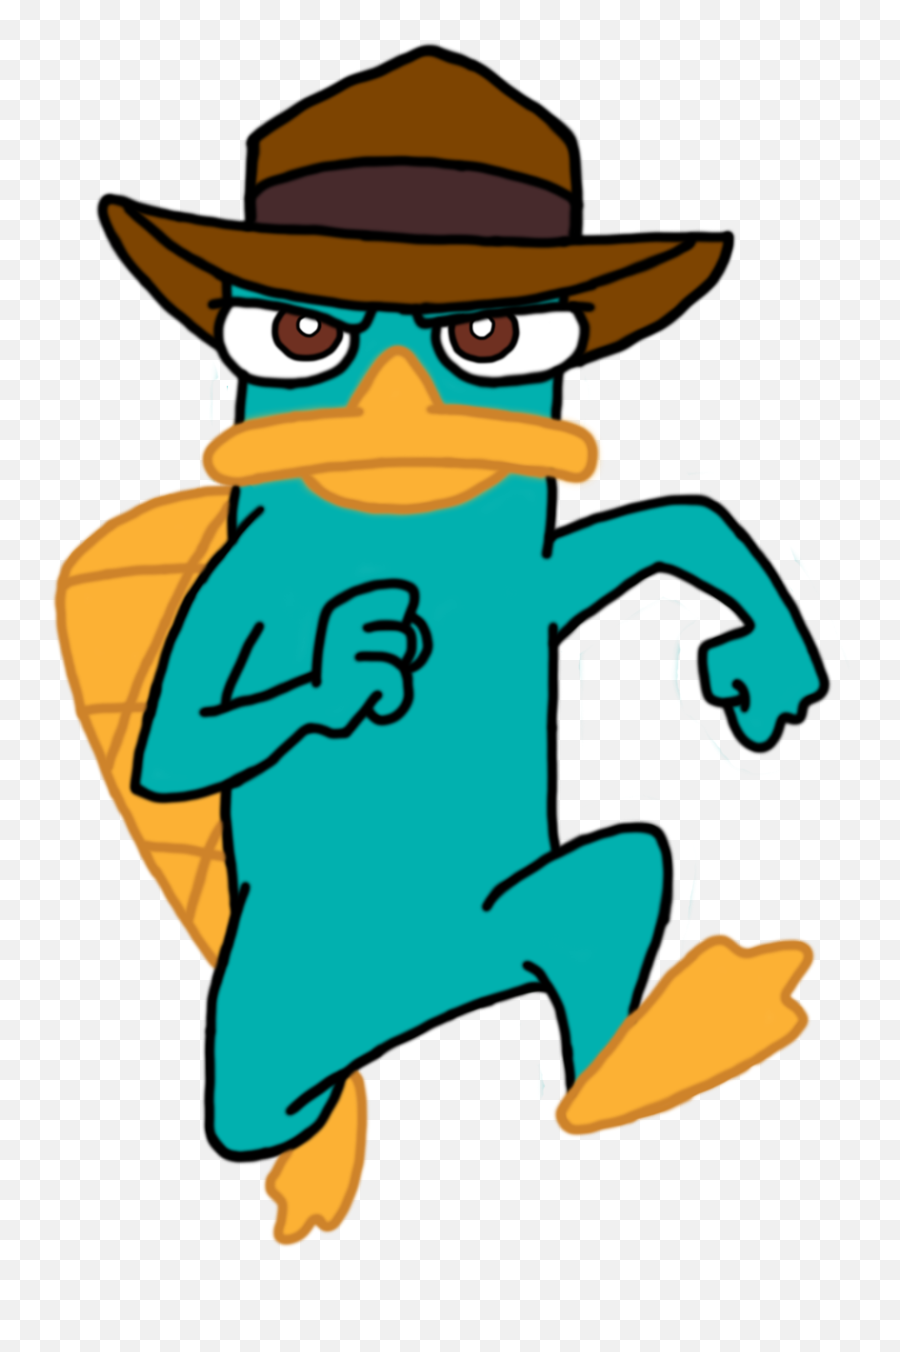 Perry The Platypus Hd Wallpaper - Perry The Platypus Png,Platypus Png